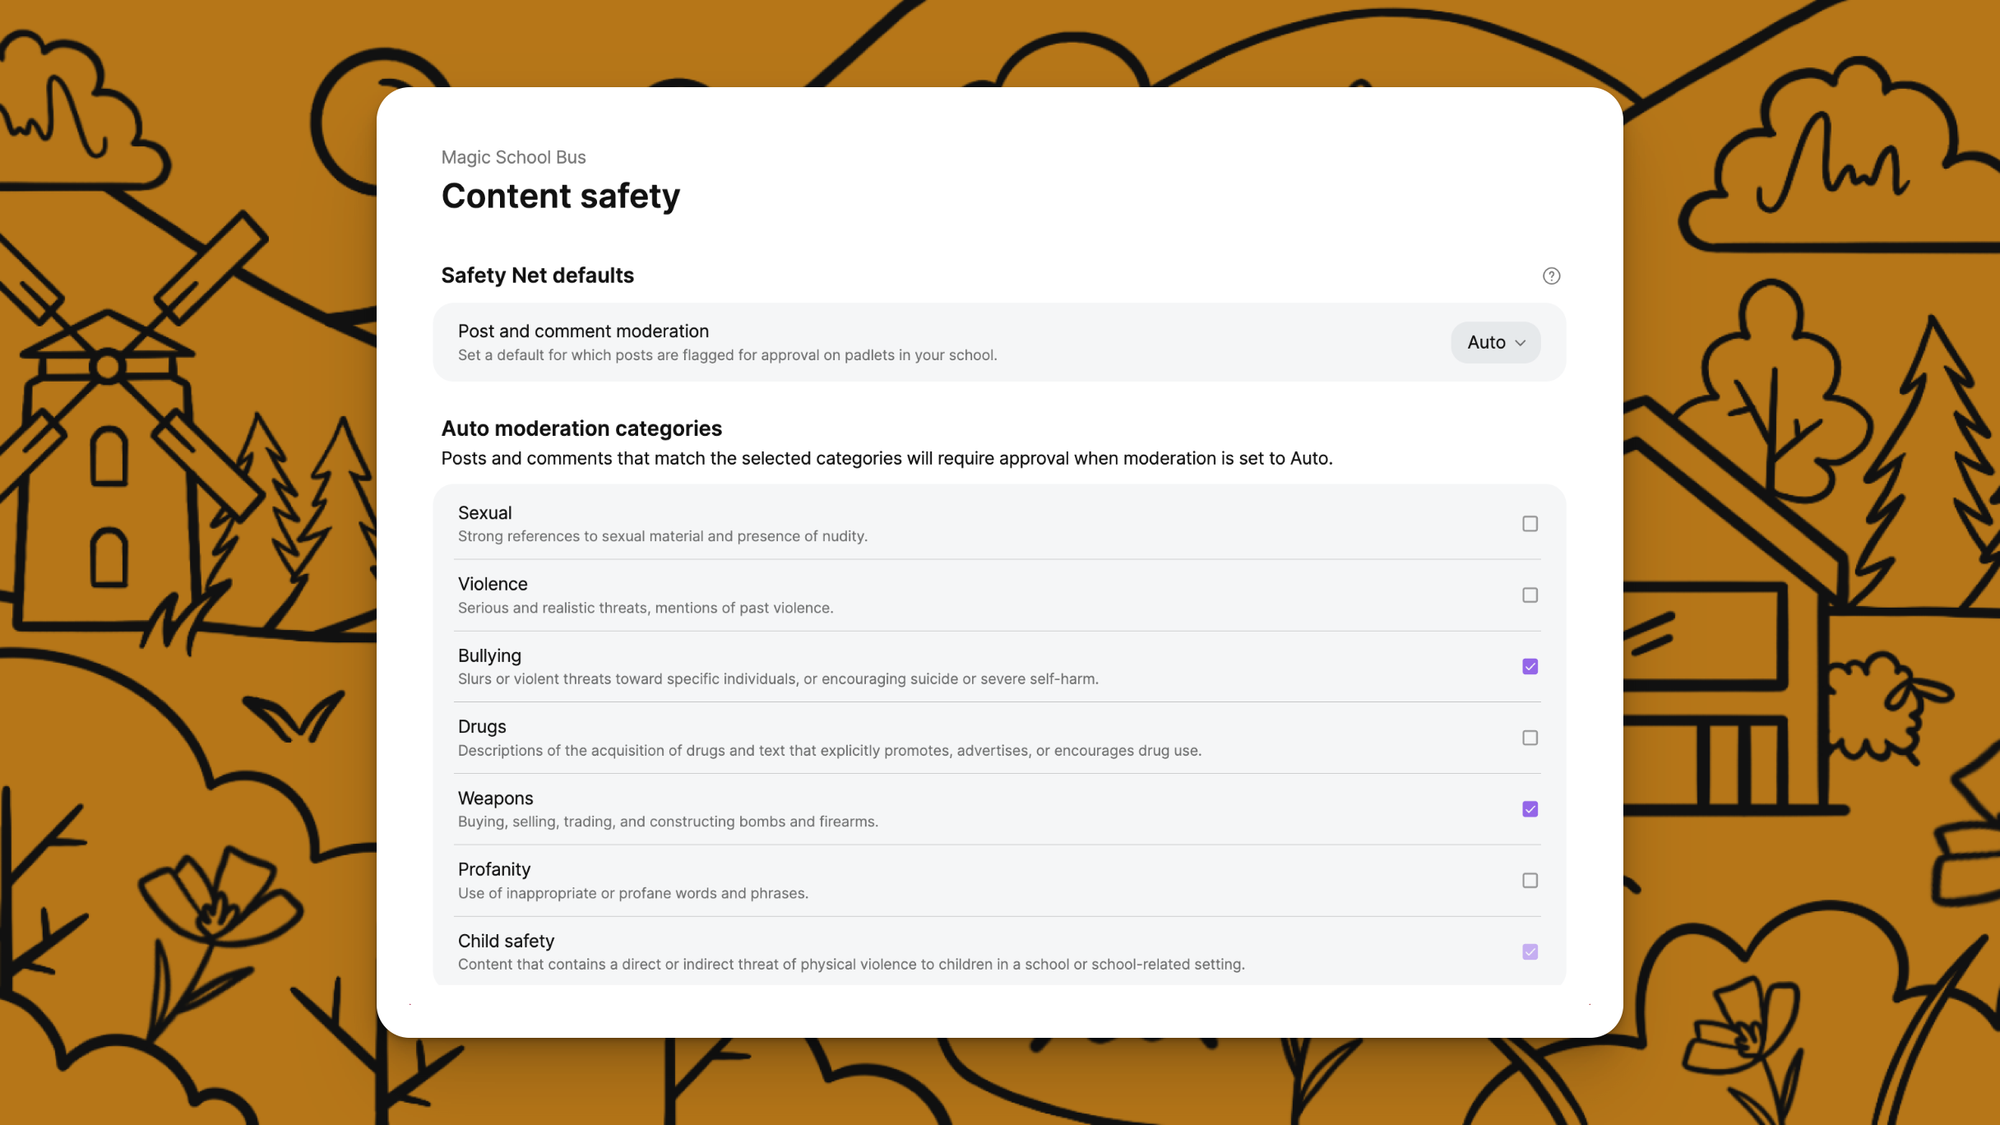 A screenshot of the Safety Net content standards